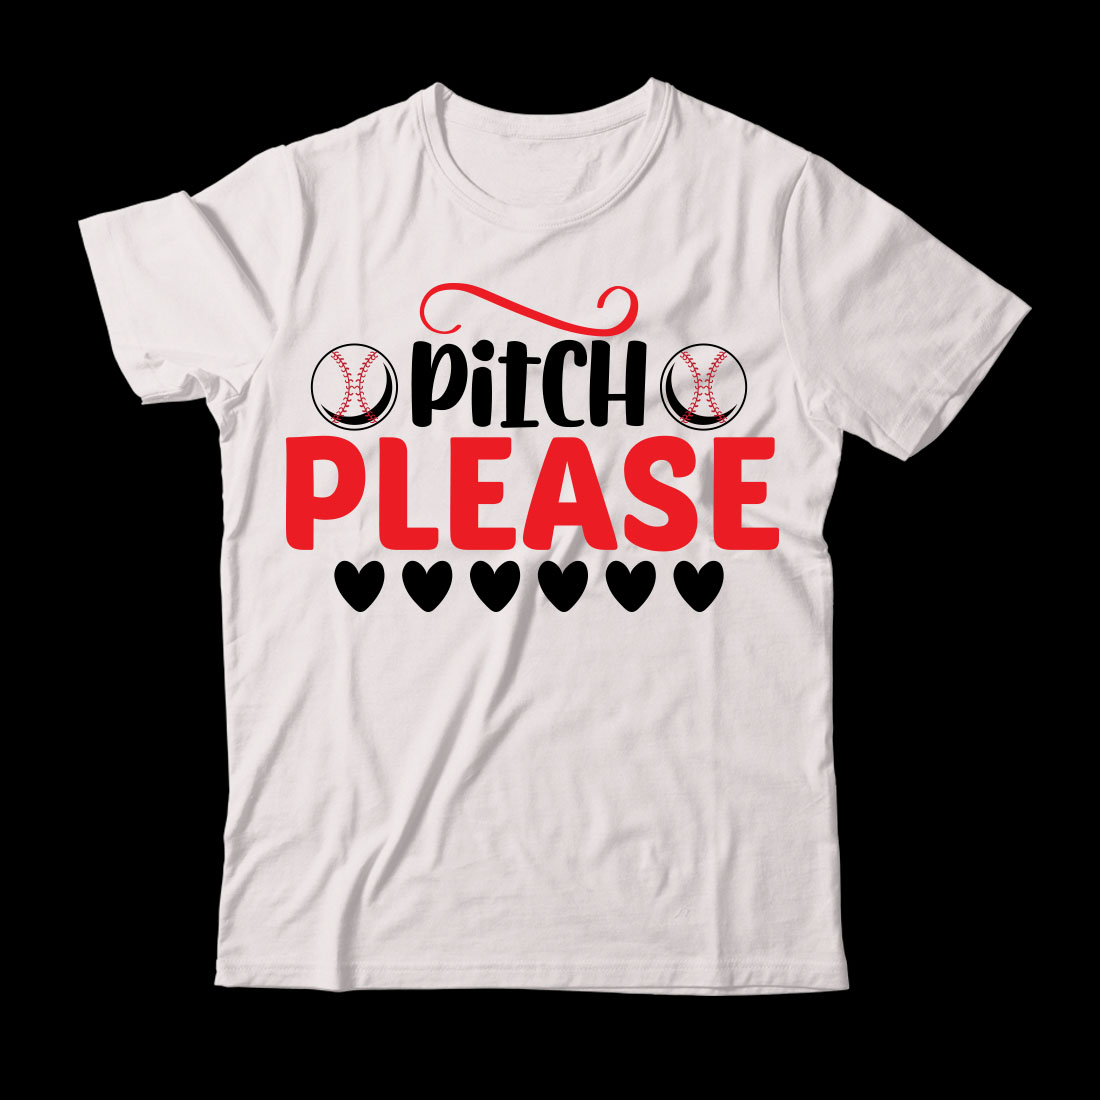 White t - shirt that says pitch please.